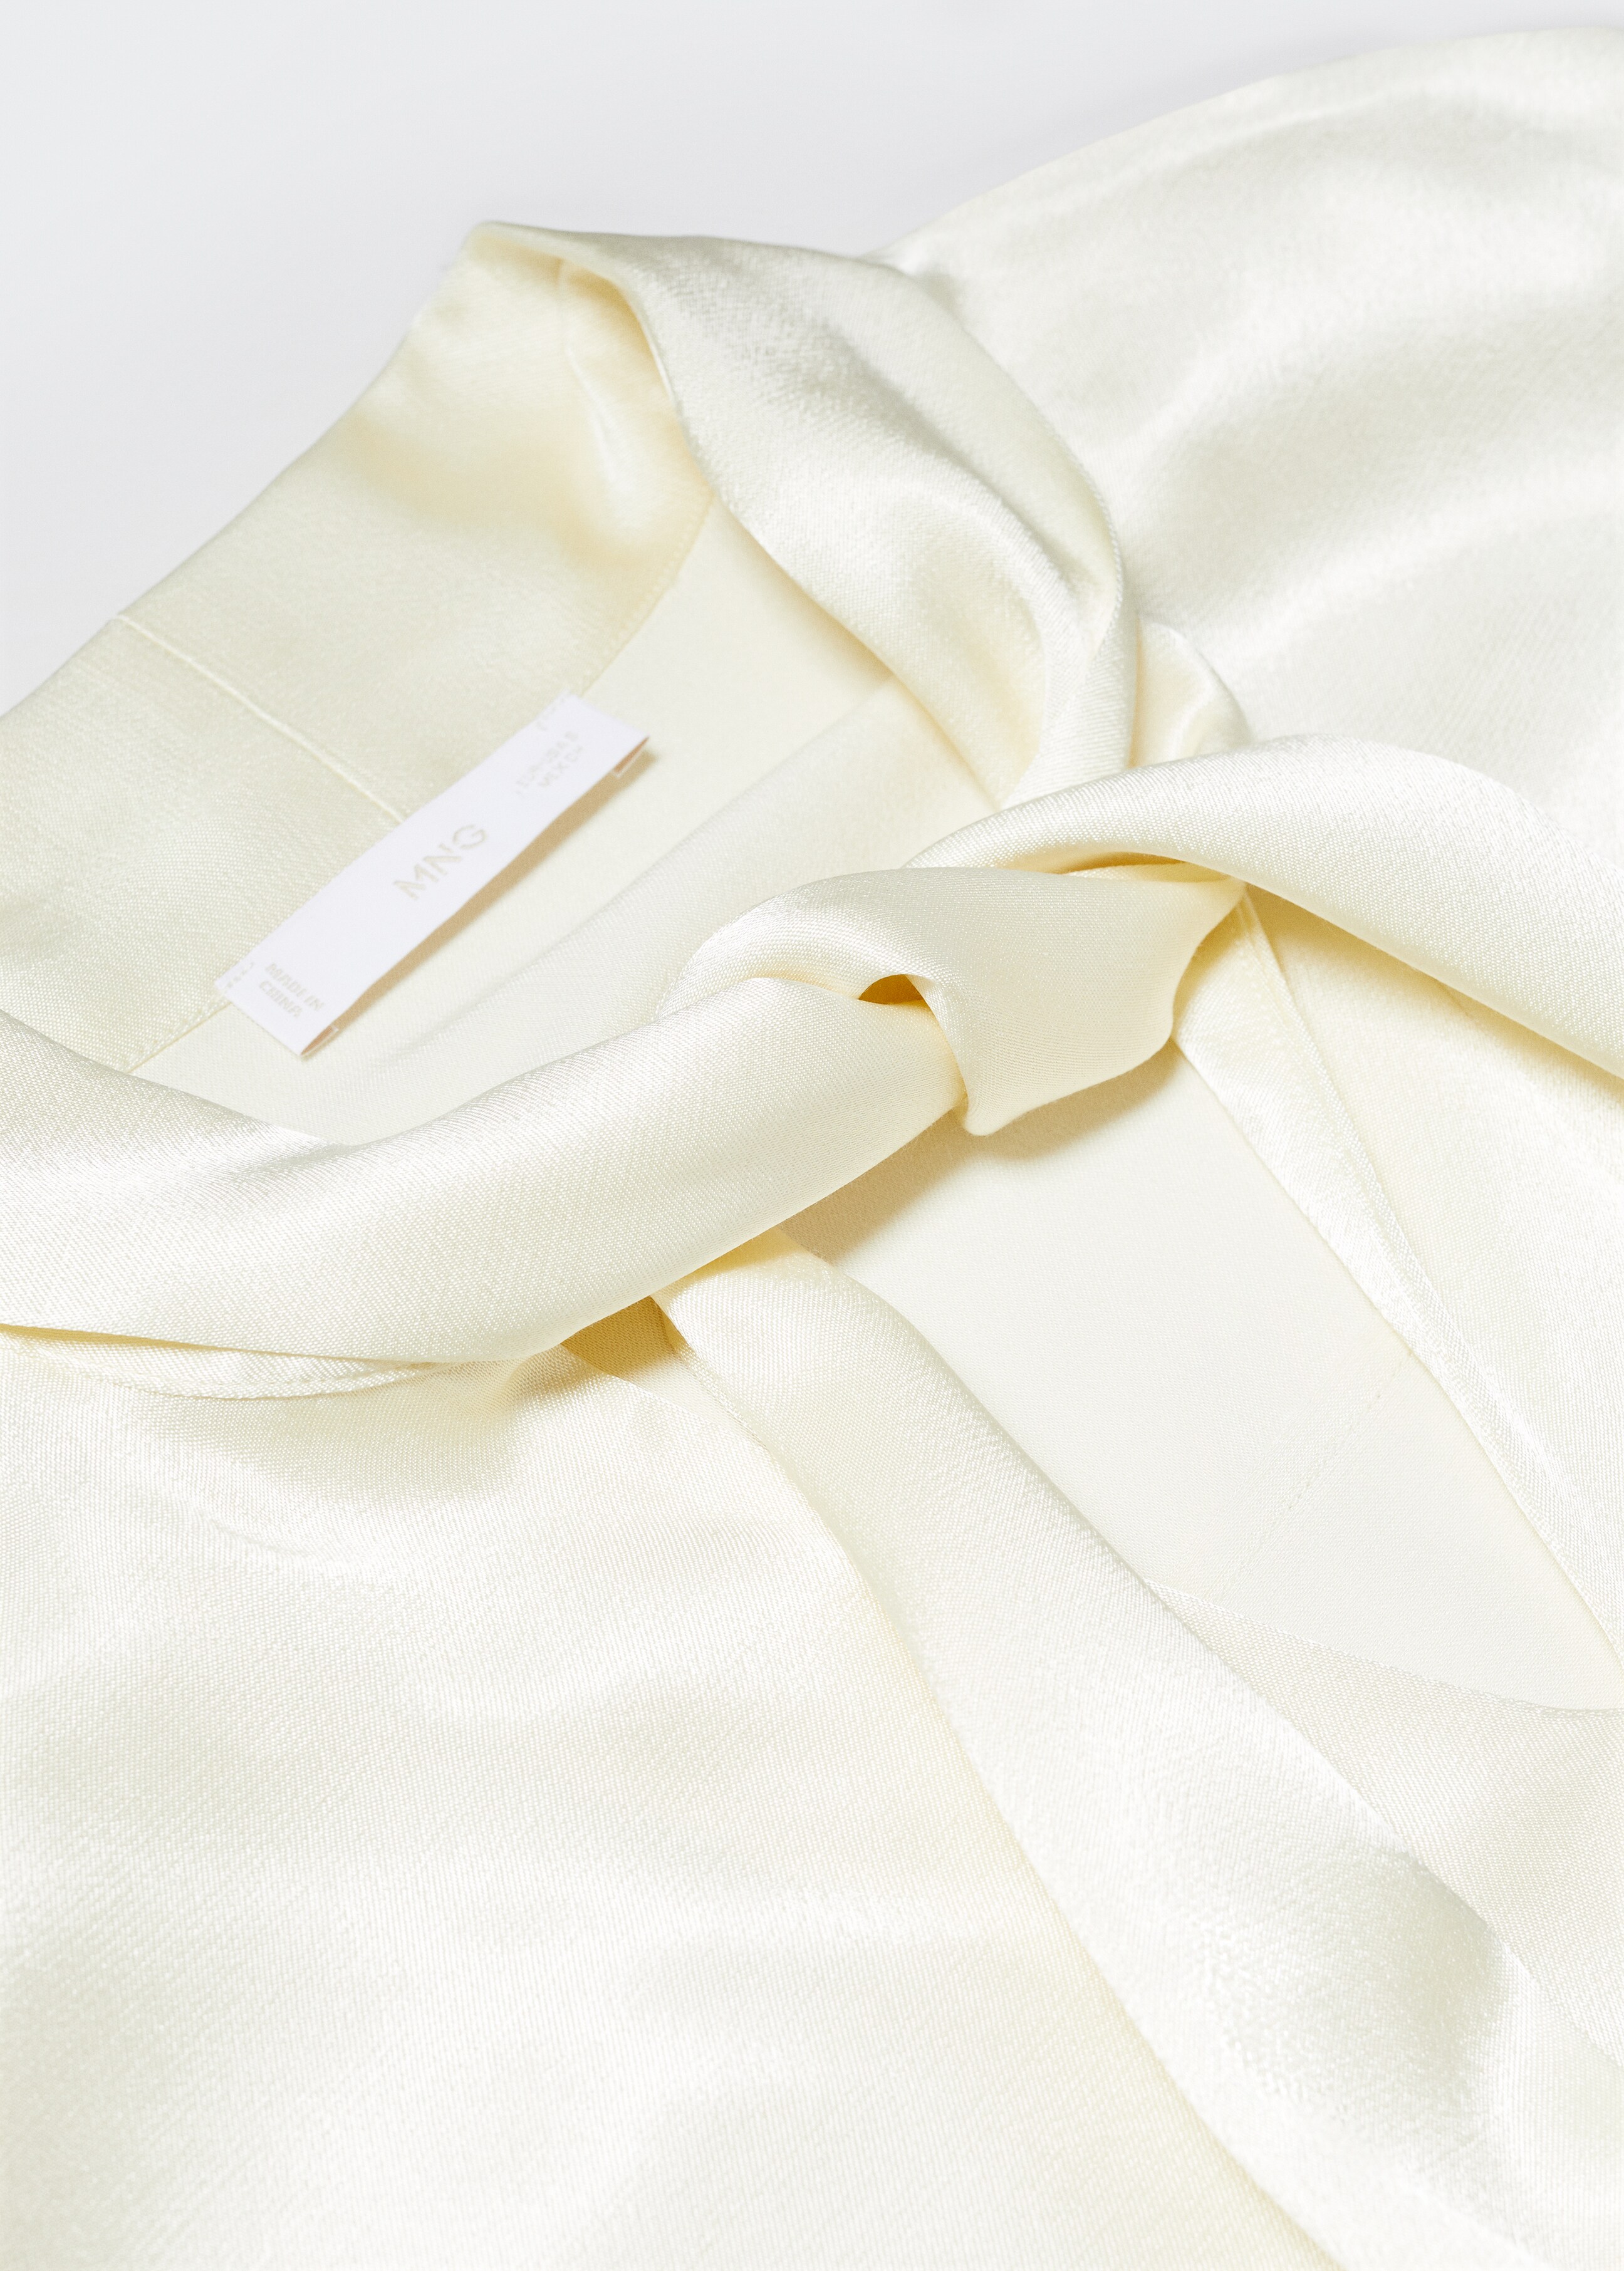 Satin blouse with bow collar - Details of the article 8